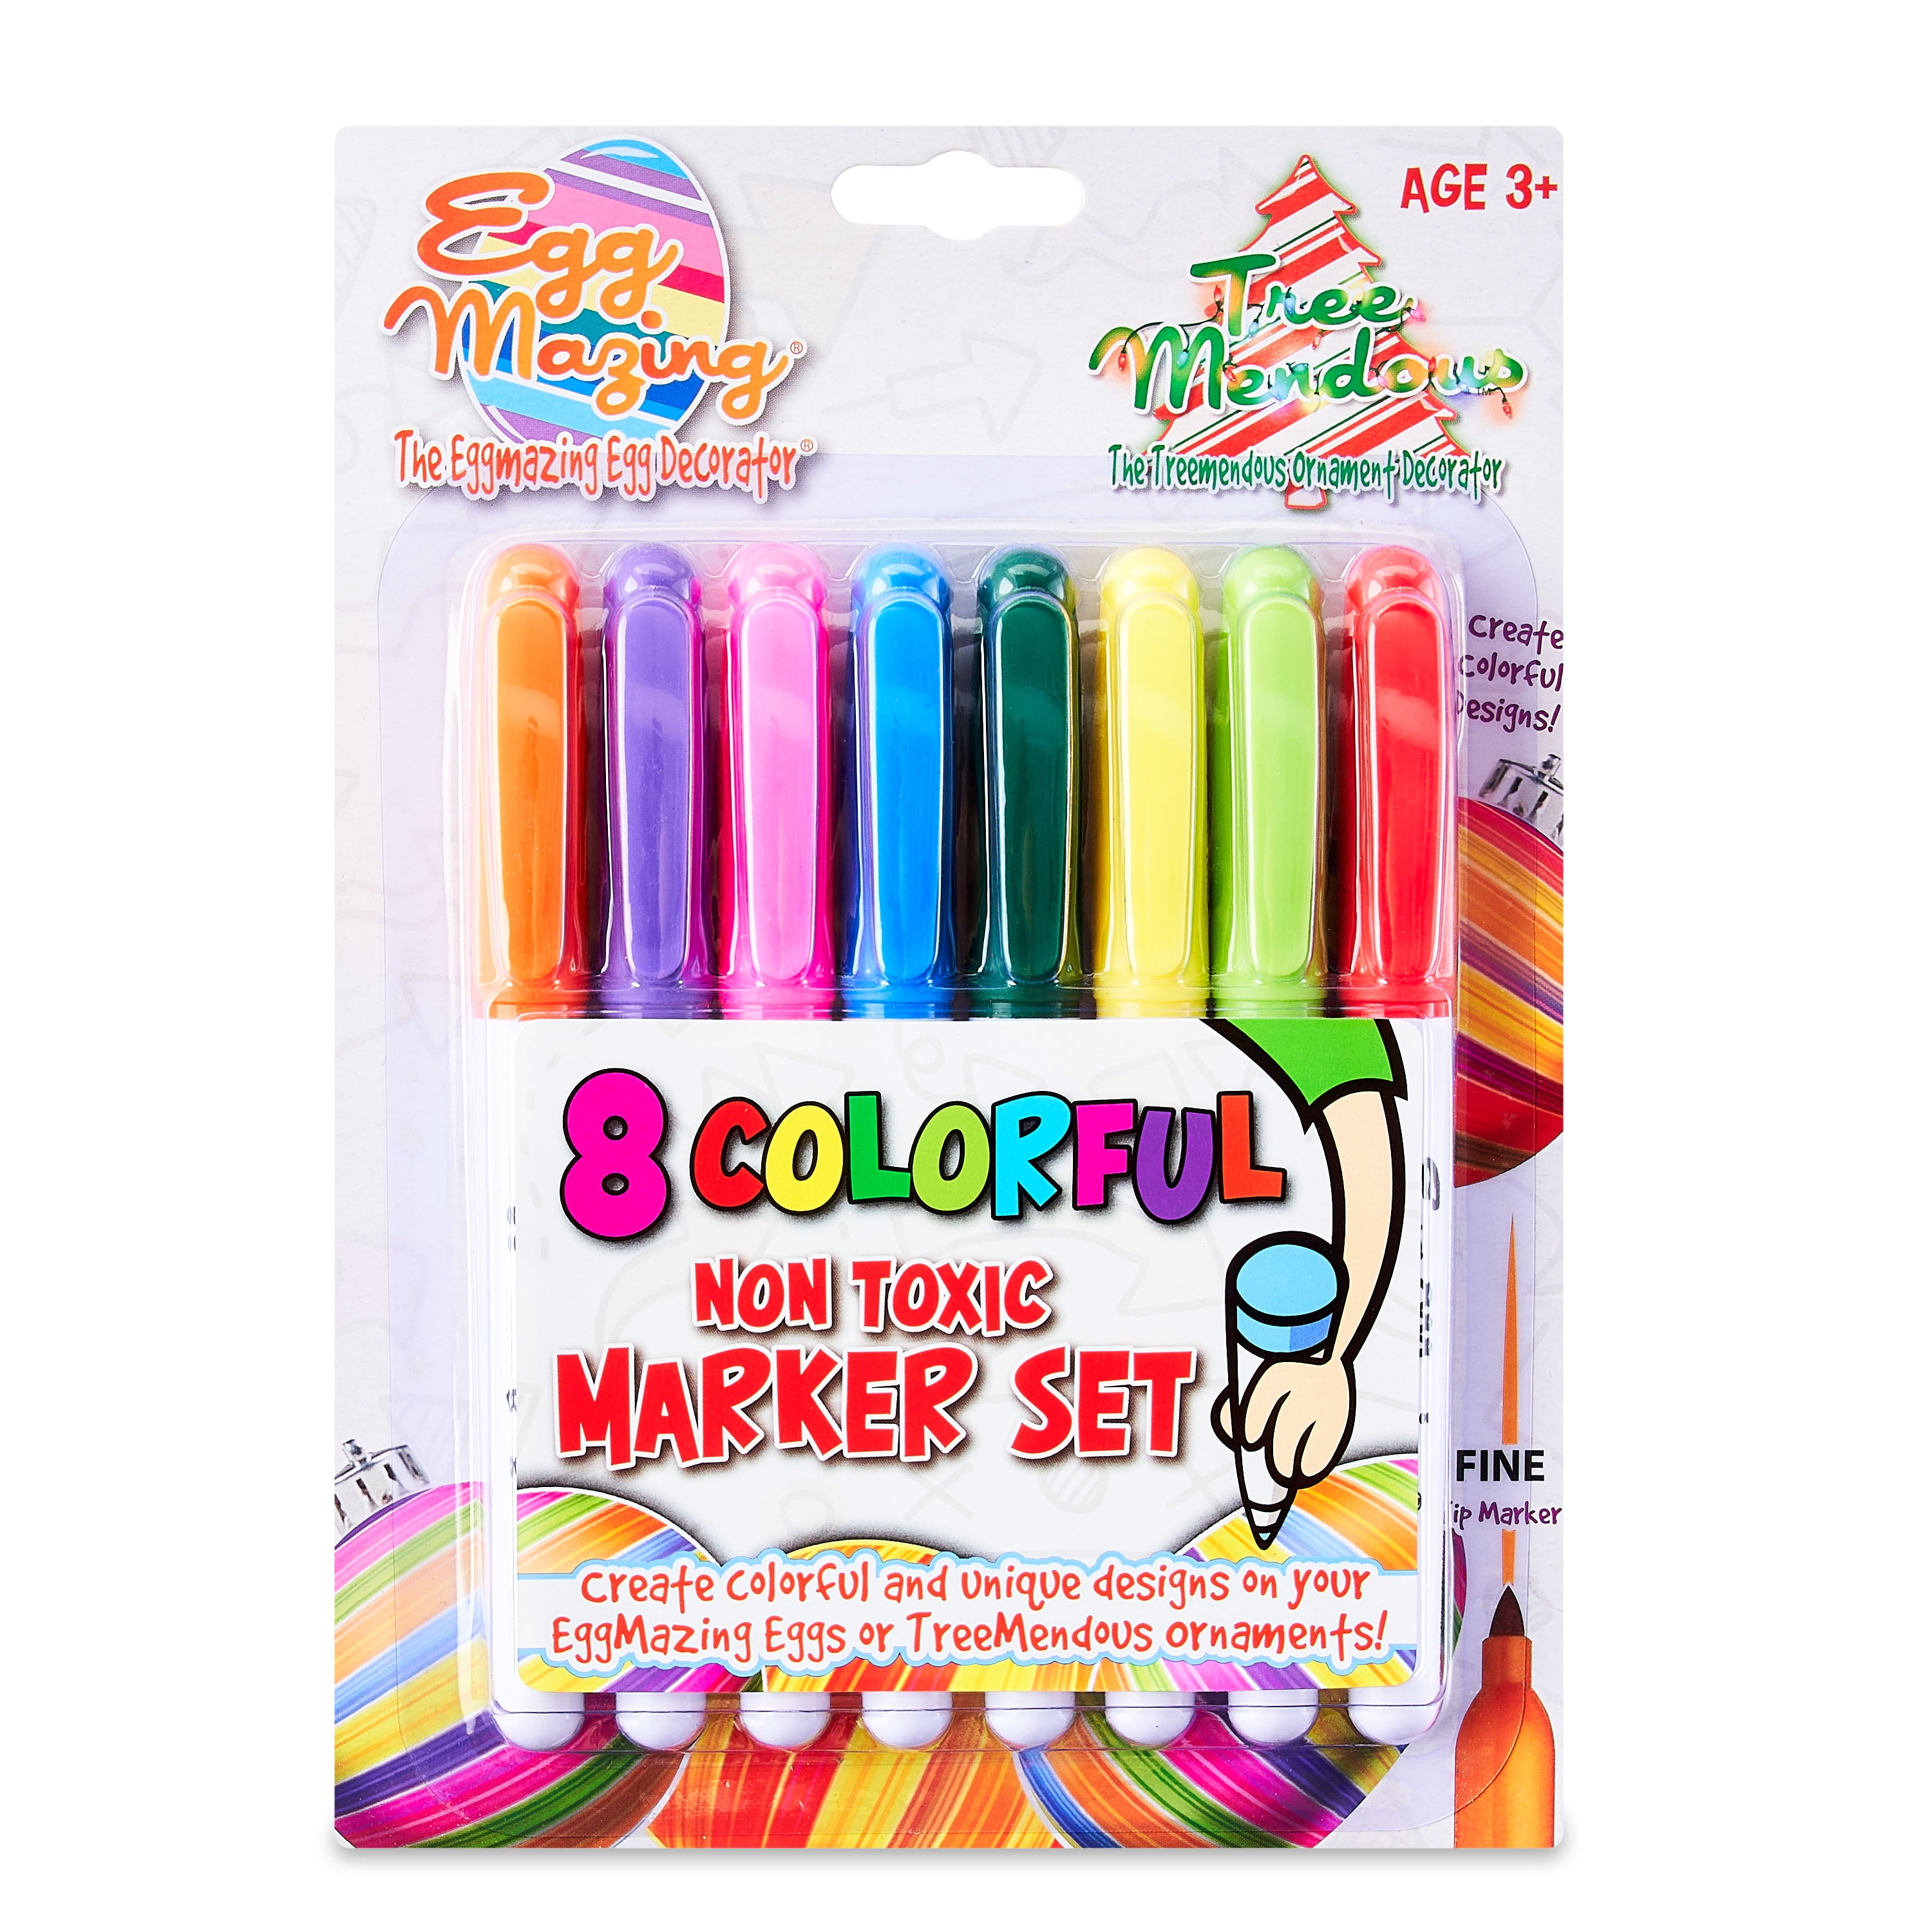 Eggmazing Egg Decorator With 8 Colorful Non Toxic Markers Style